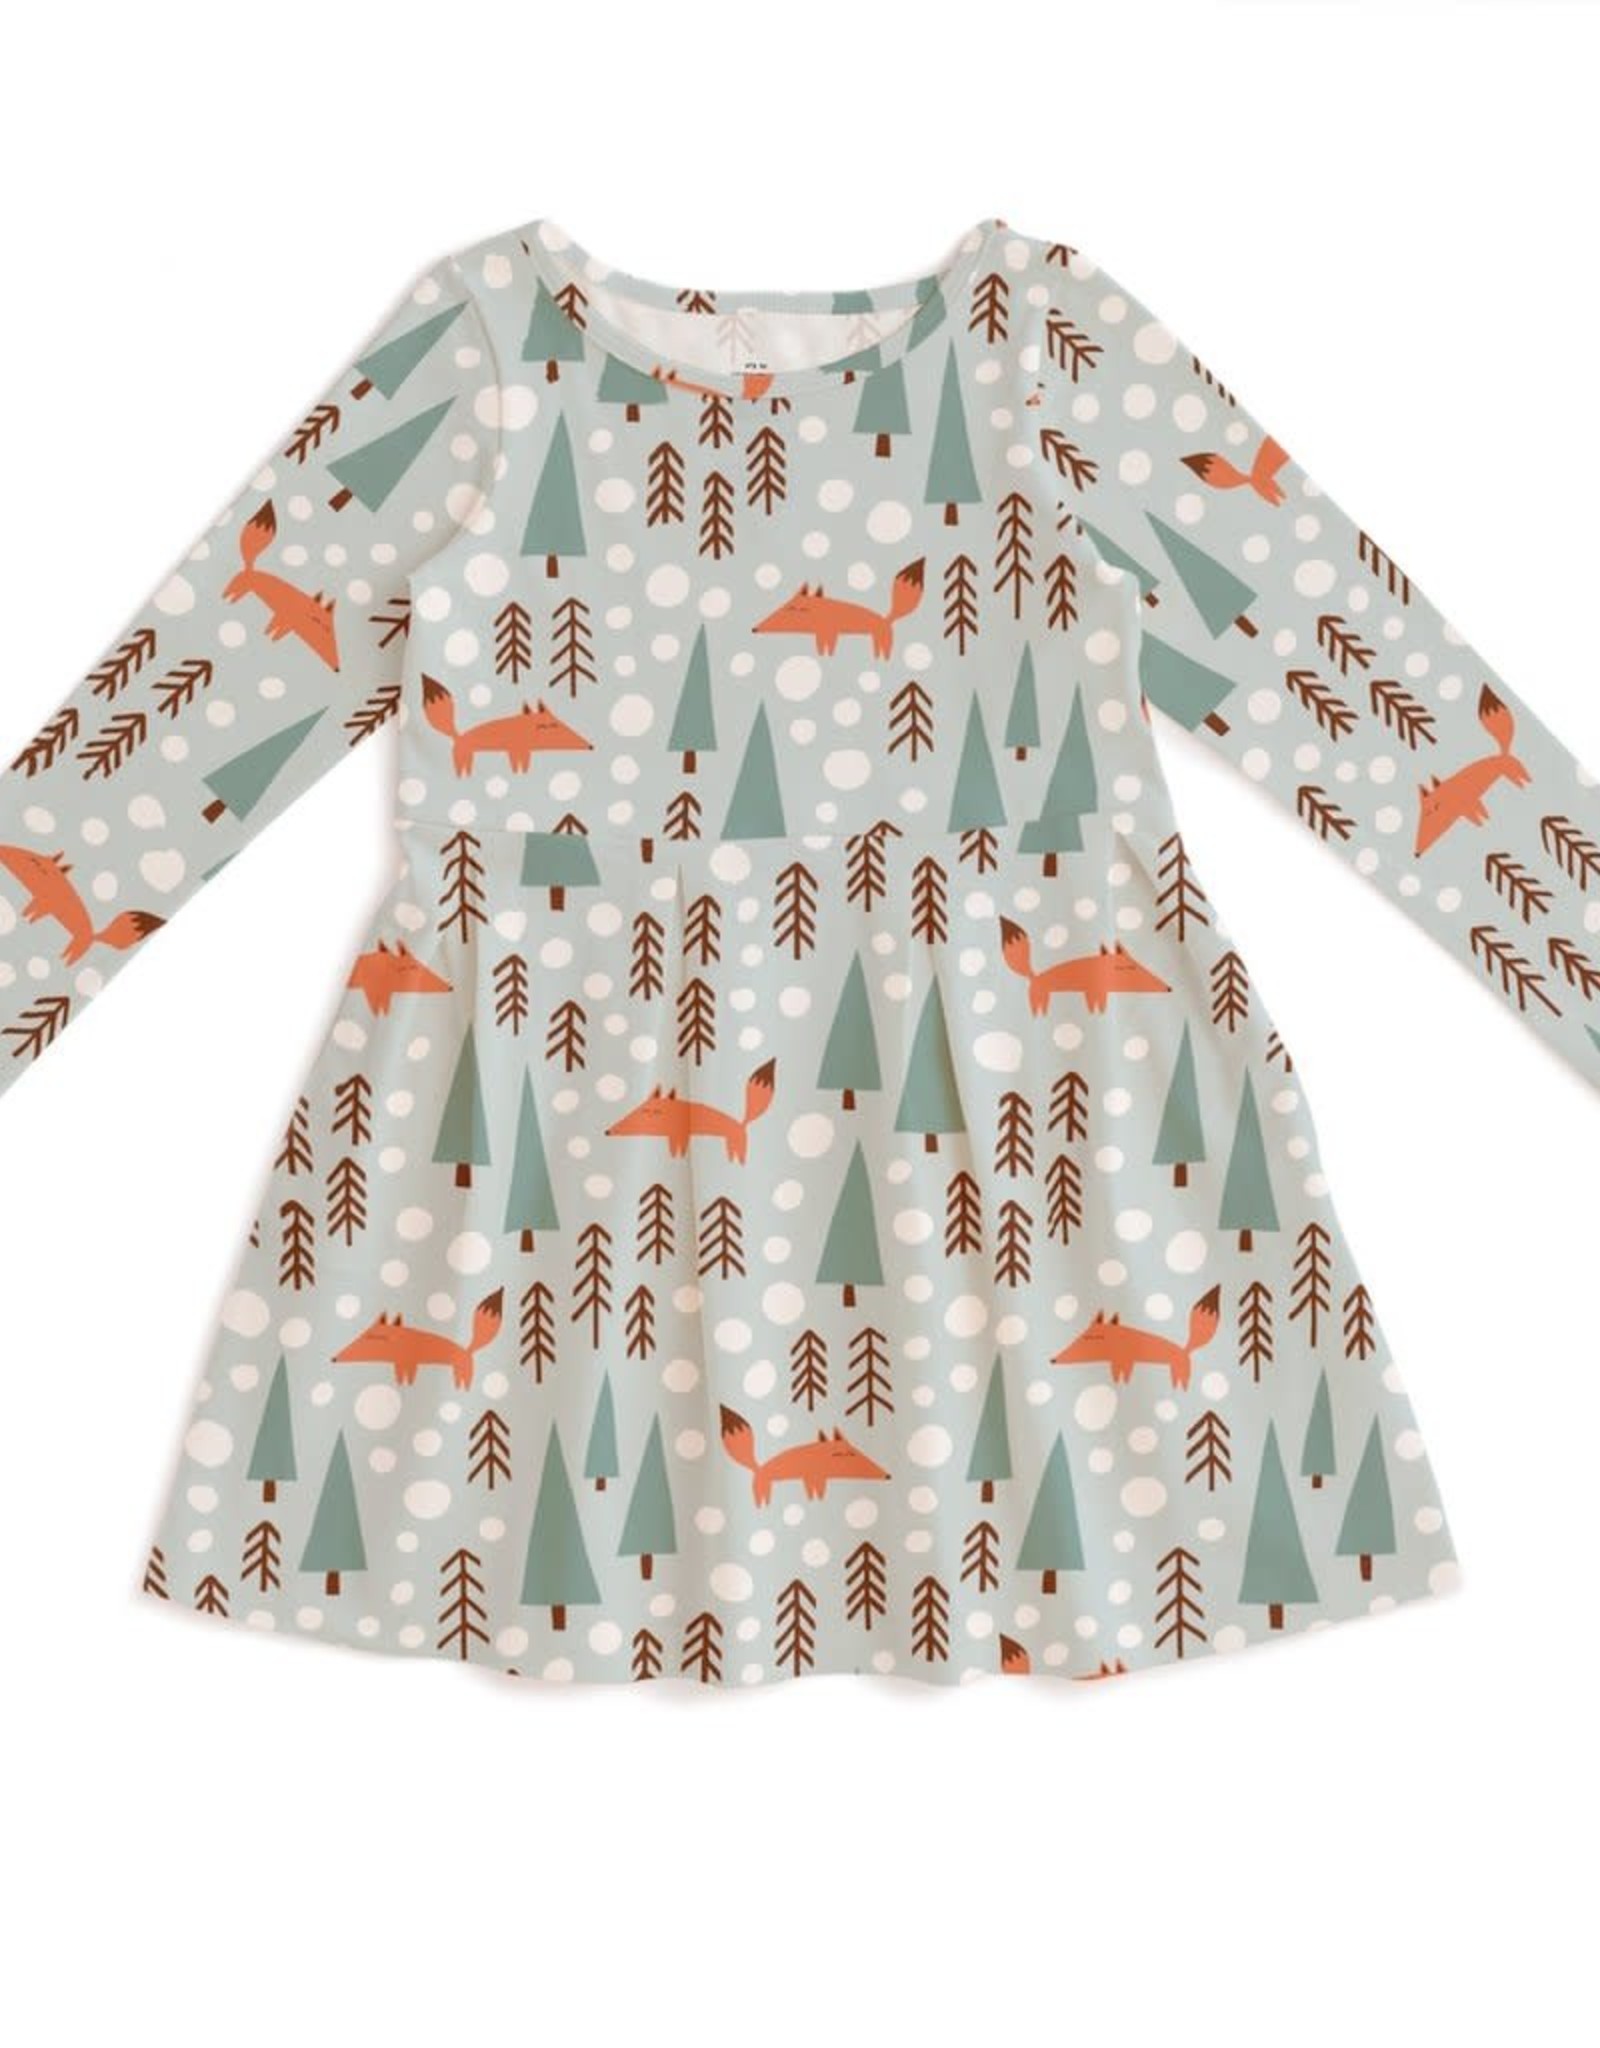 Winter Water Factory Madison  Dress, Pale Blue with Foxes